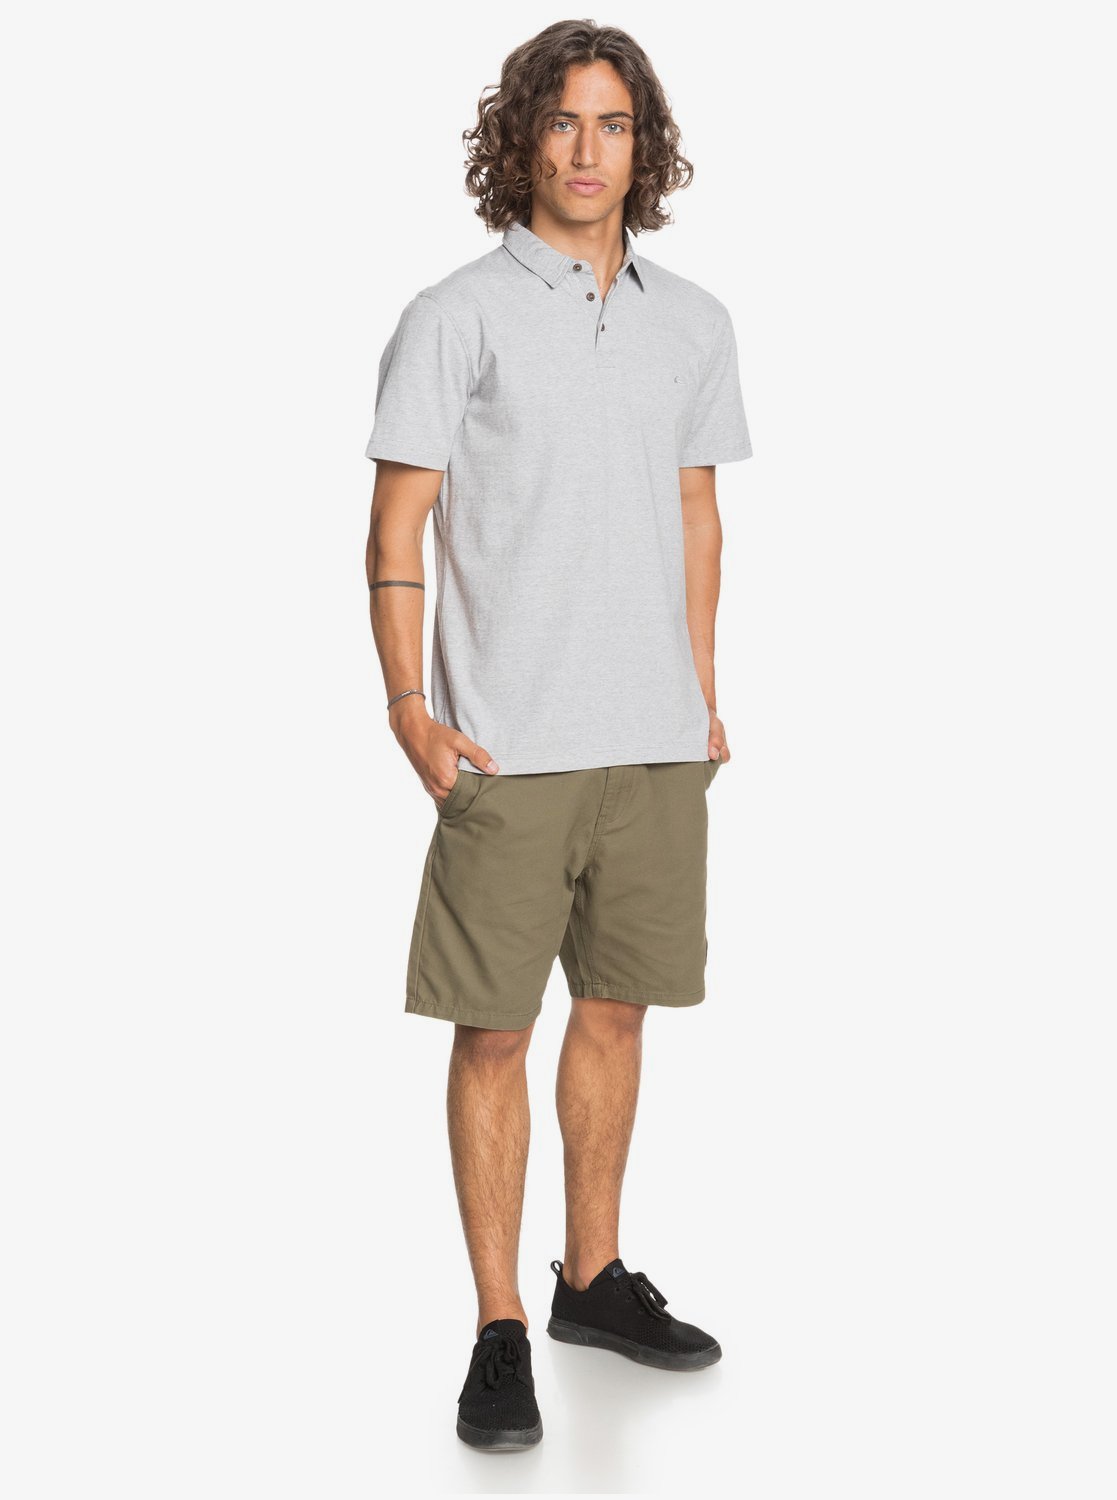 Quiksilver Everyday SunCruise Mens Polo SJSH L